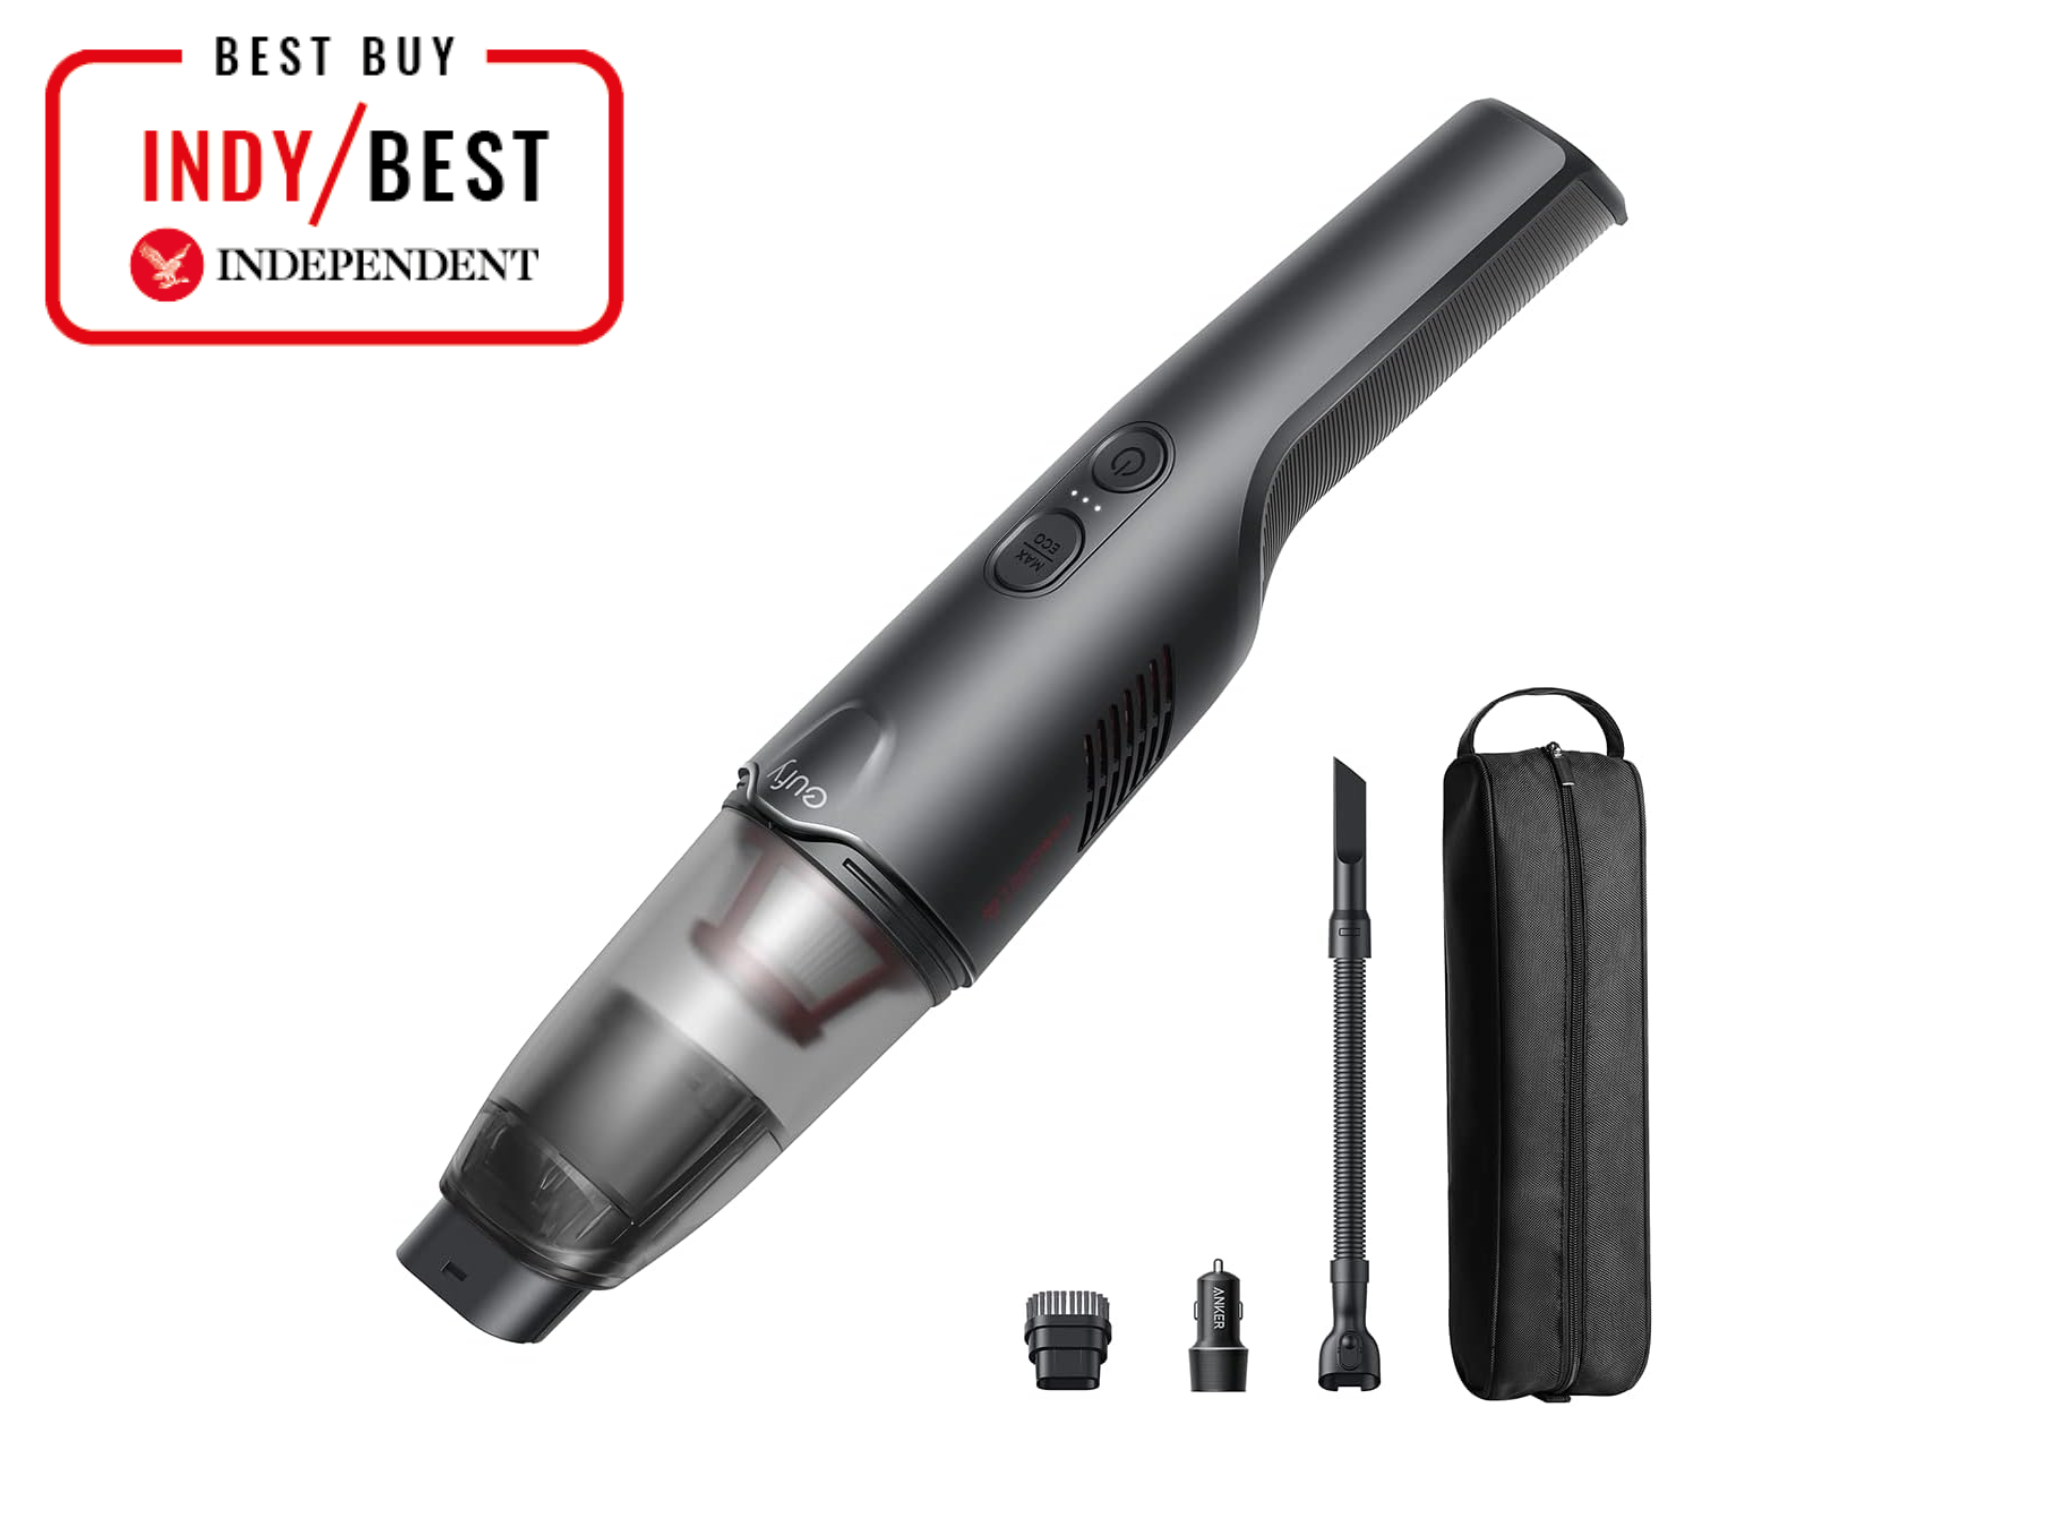 eufy-h20-cordless-vacuum-review-indybest (1).png